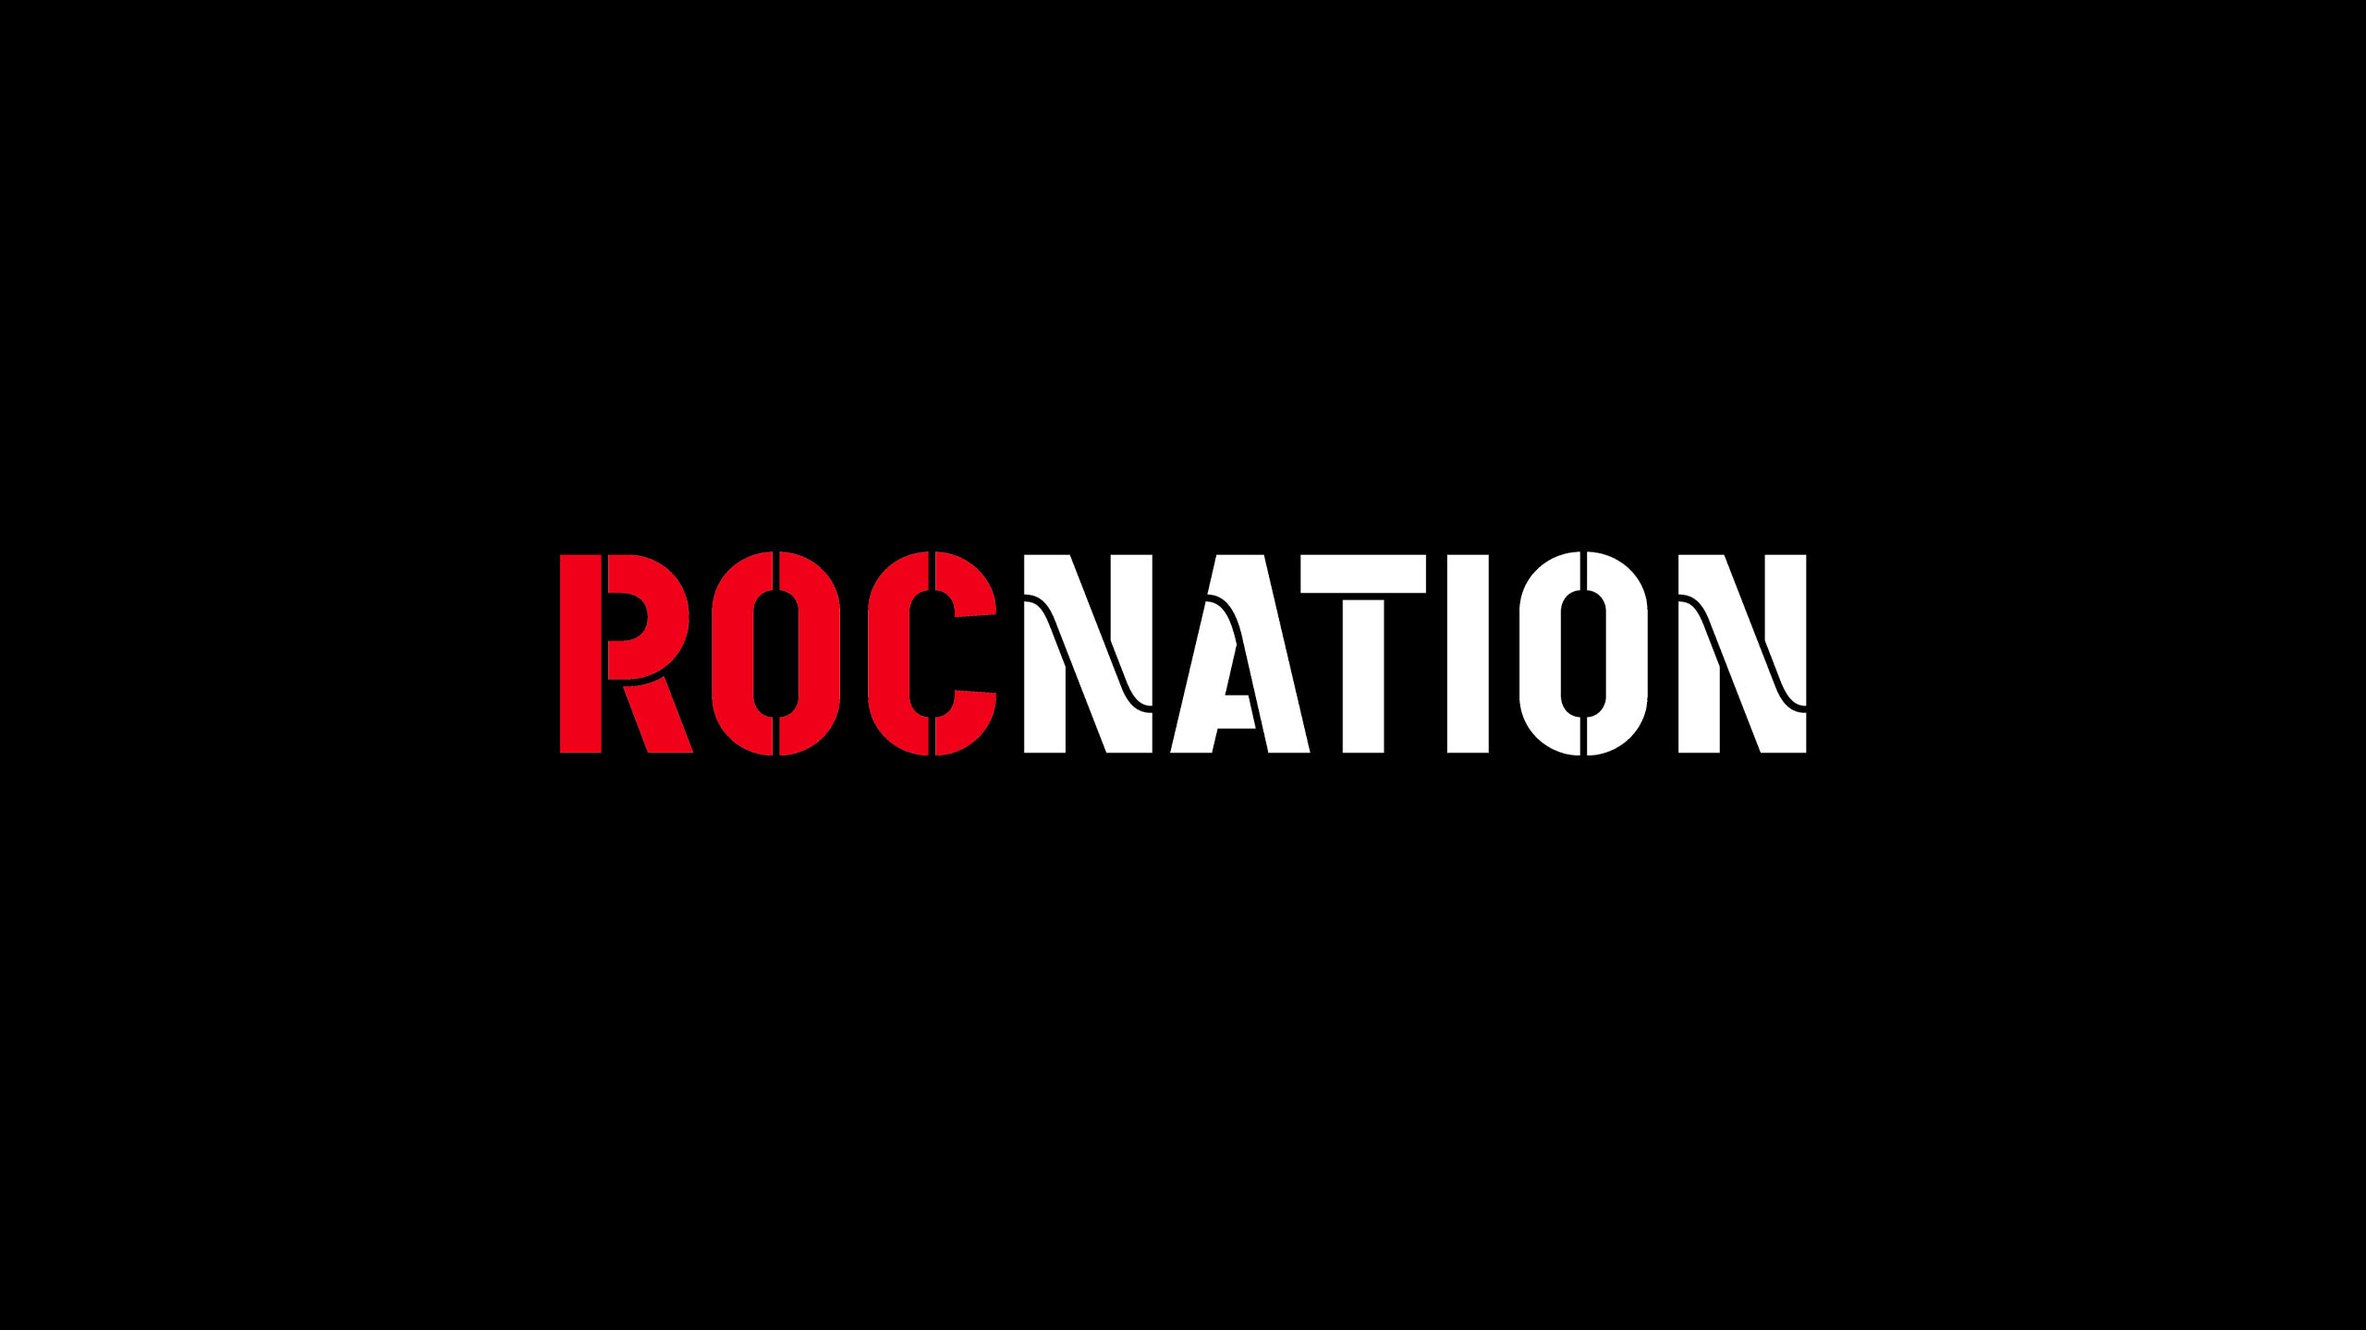 Casting Models For Roc Nation Music Video! ?